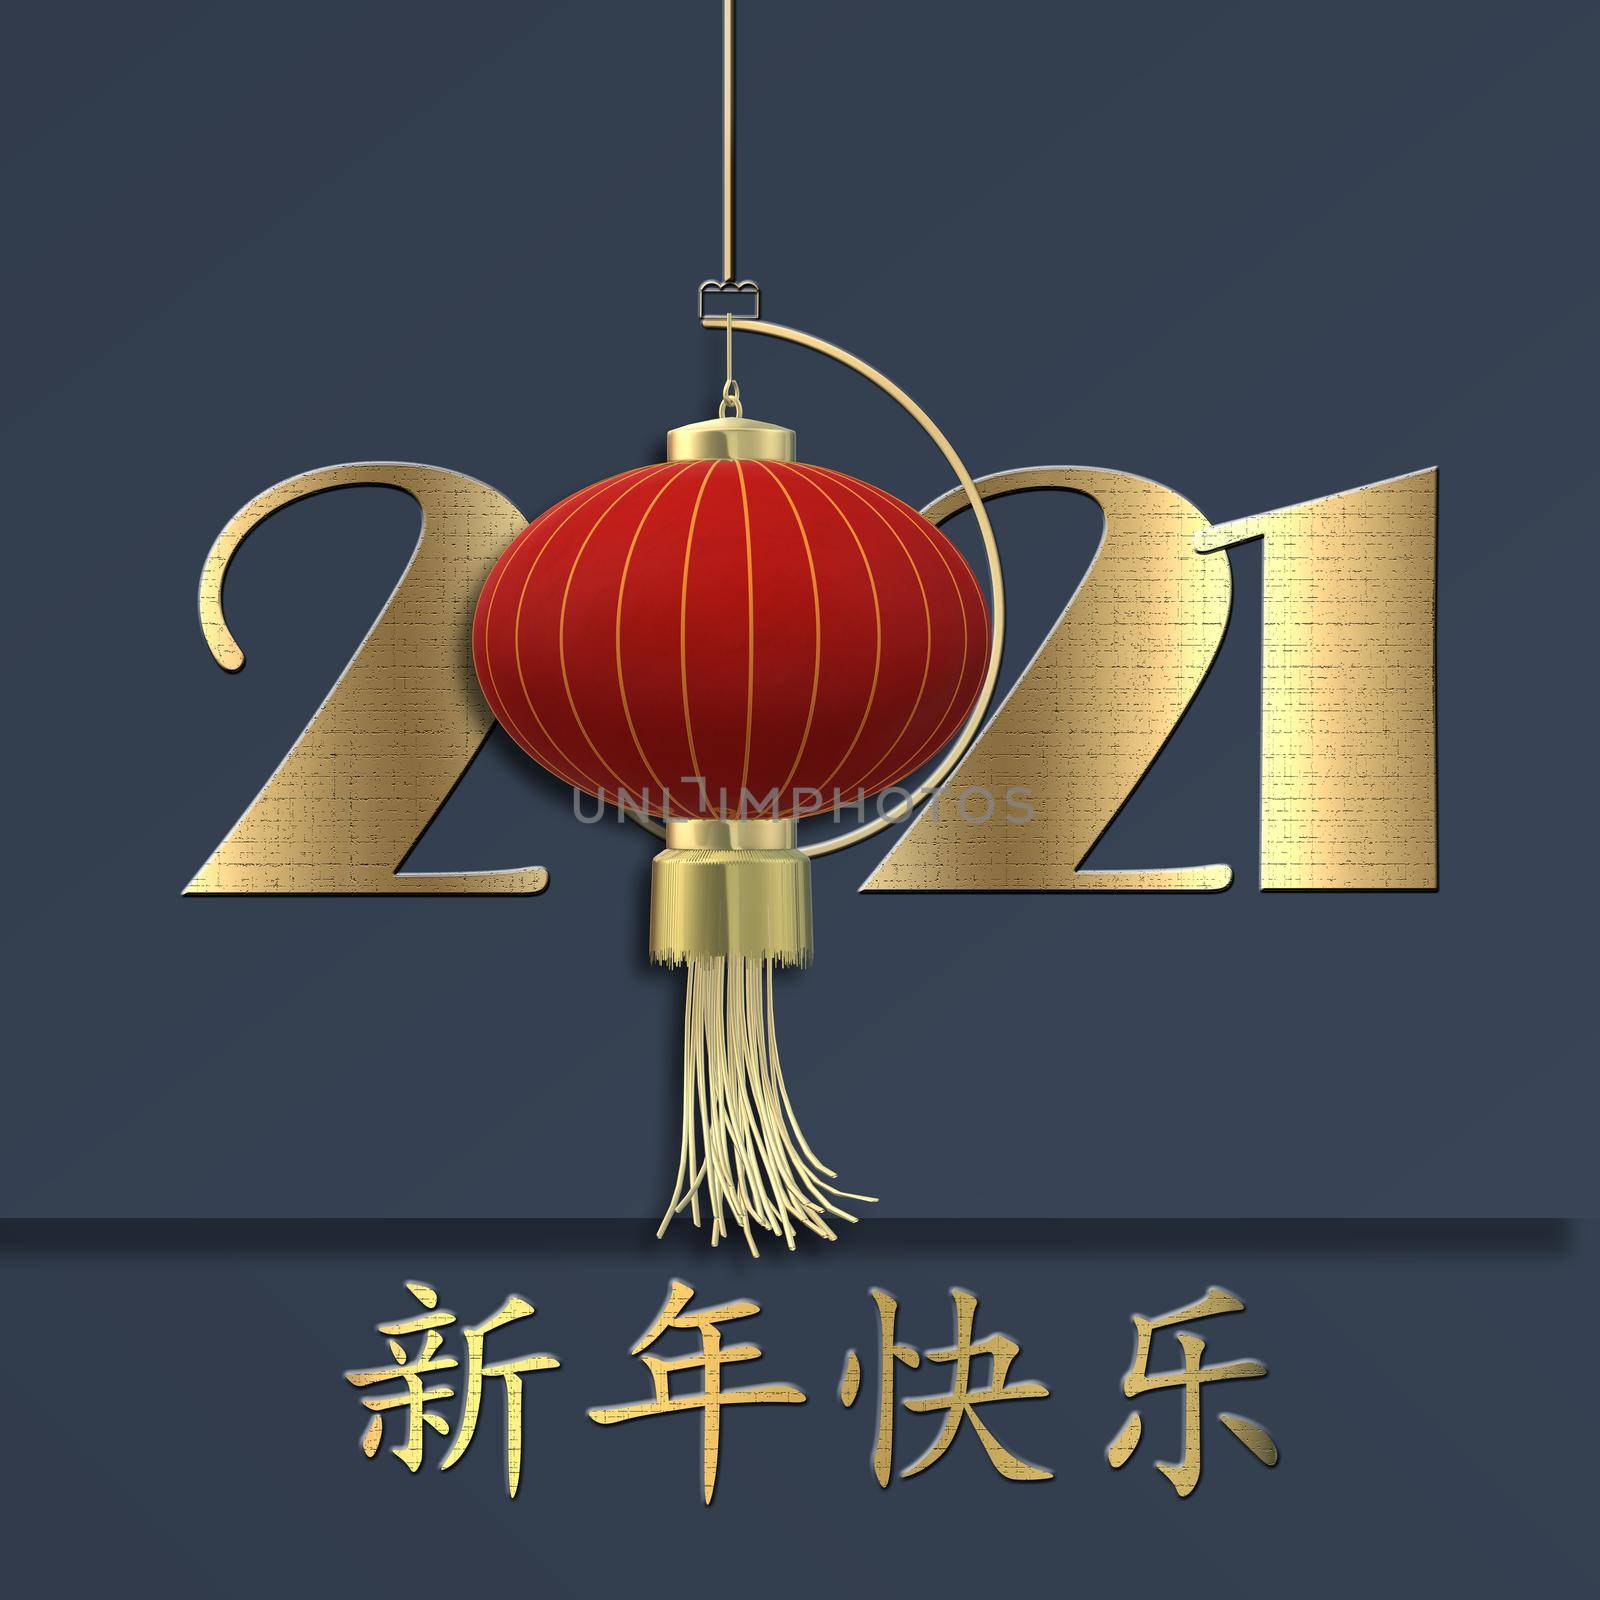 Chinese New Year 2021. Gold text Happy Chinese new year, digit 2021, lantern on blue background. Design for greetings card, invitation, posters, brochure, calendar. 3D illustration